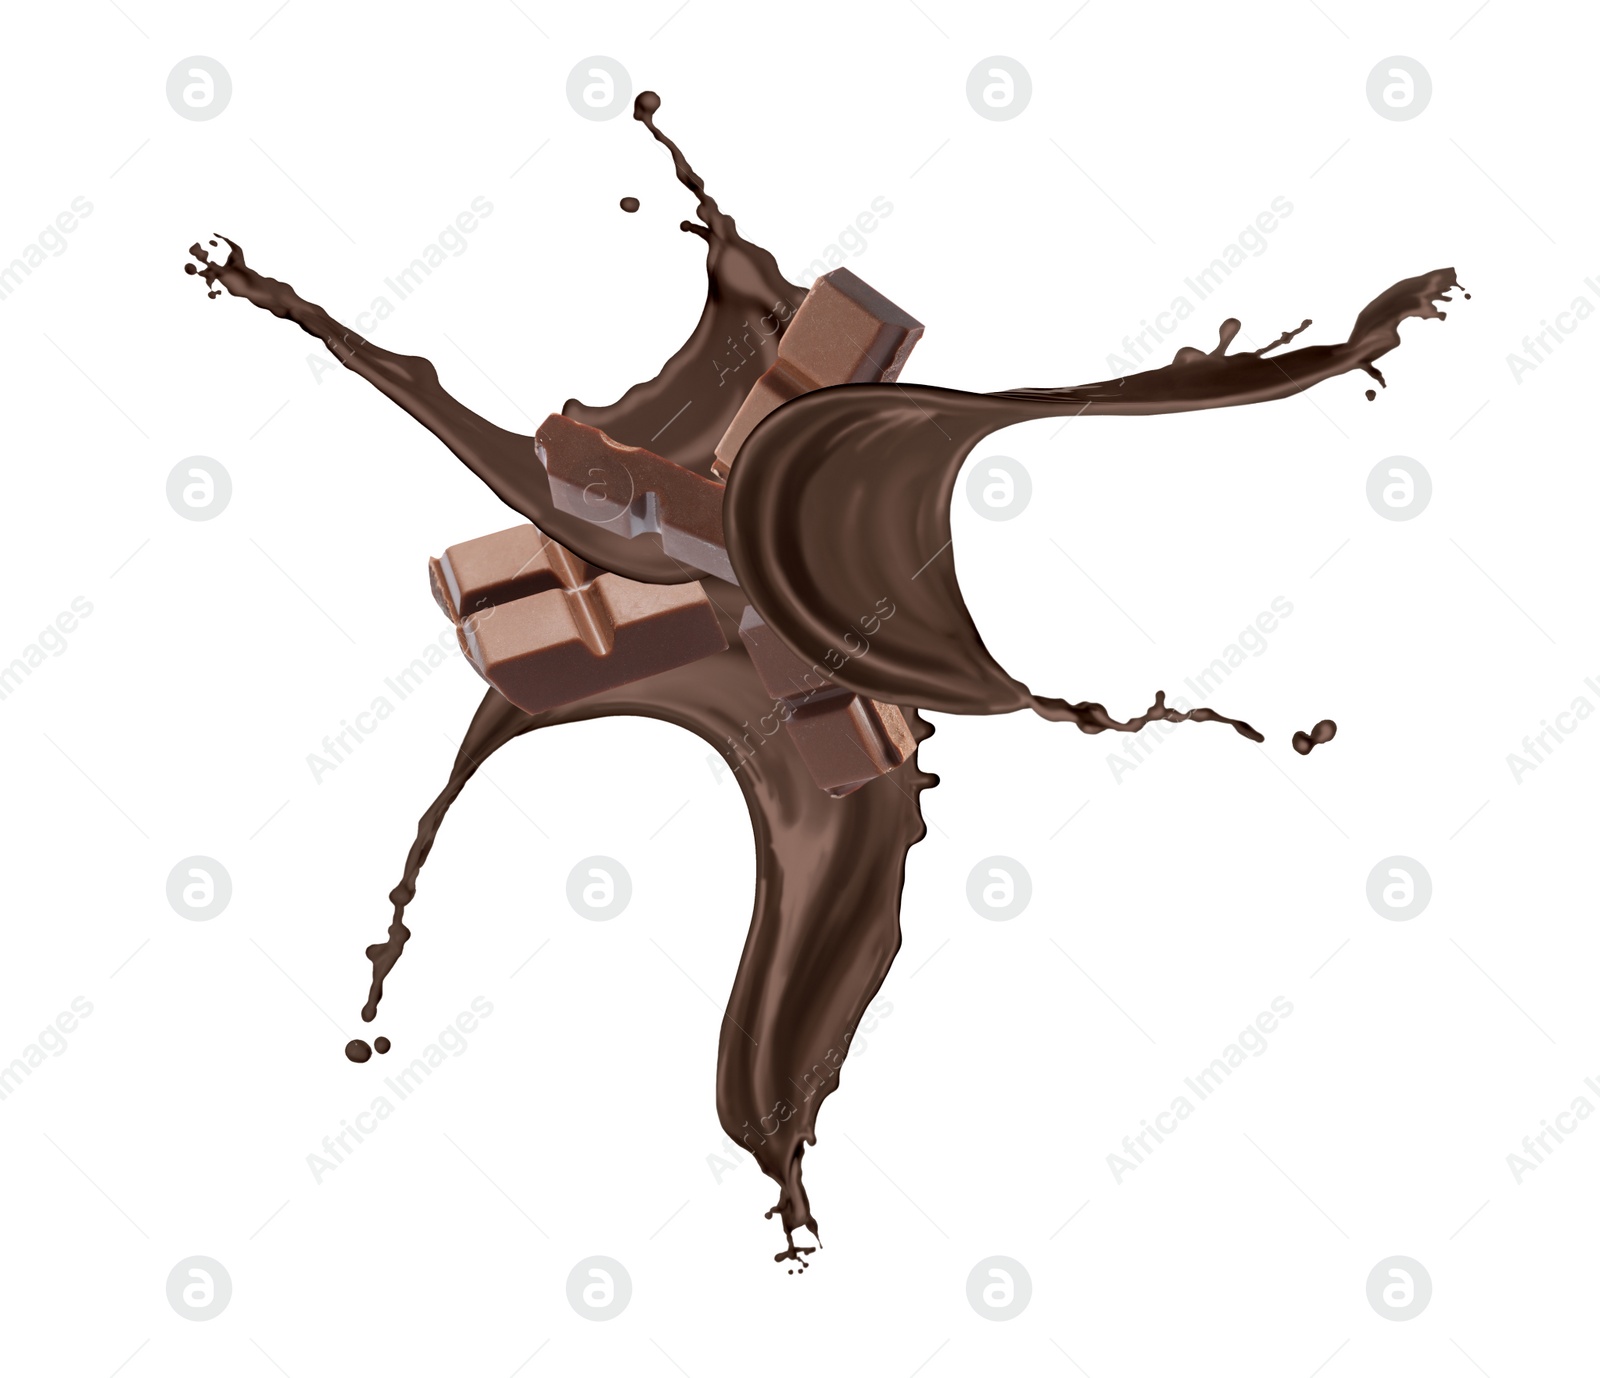 Image of Yummy melted chocolate and falling pieces on white background